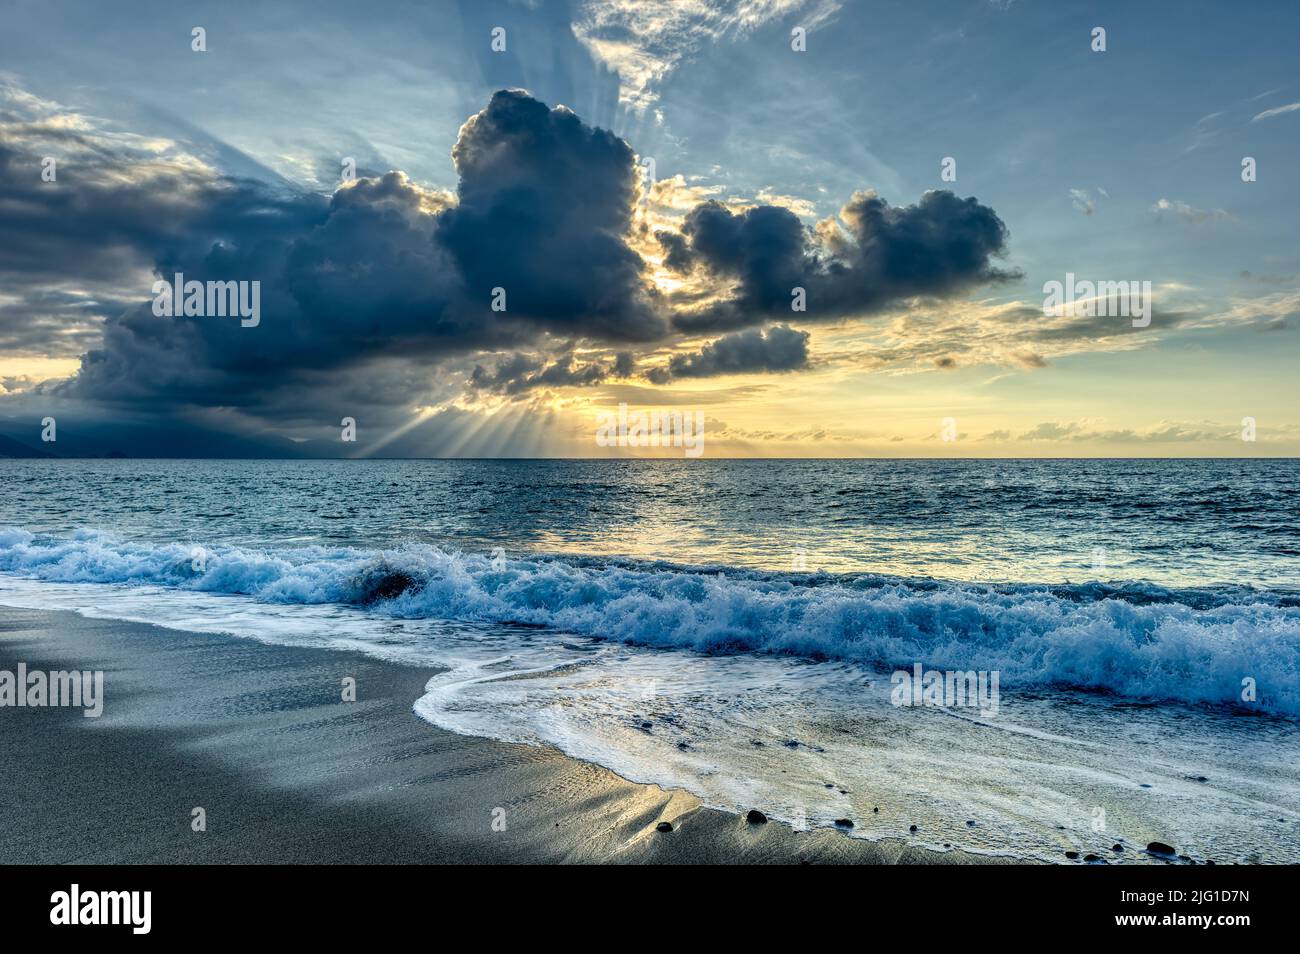 Bright Sun Rays Are Bursting Through Clouds In An Ocean Sunset Landscape Stock Photo